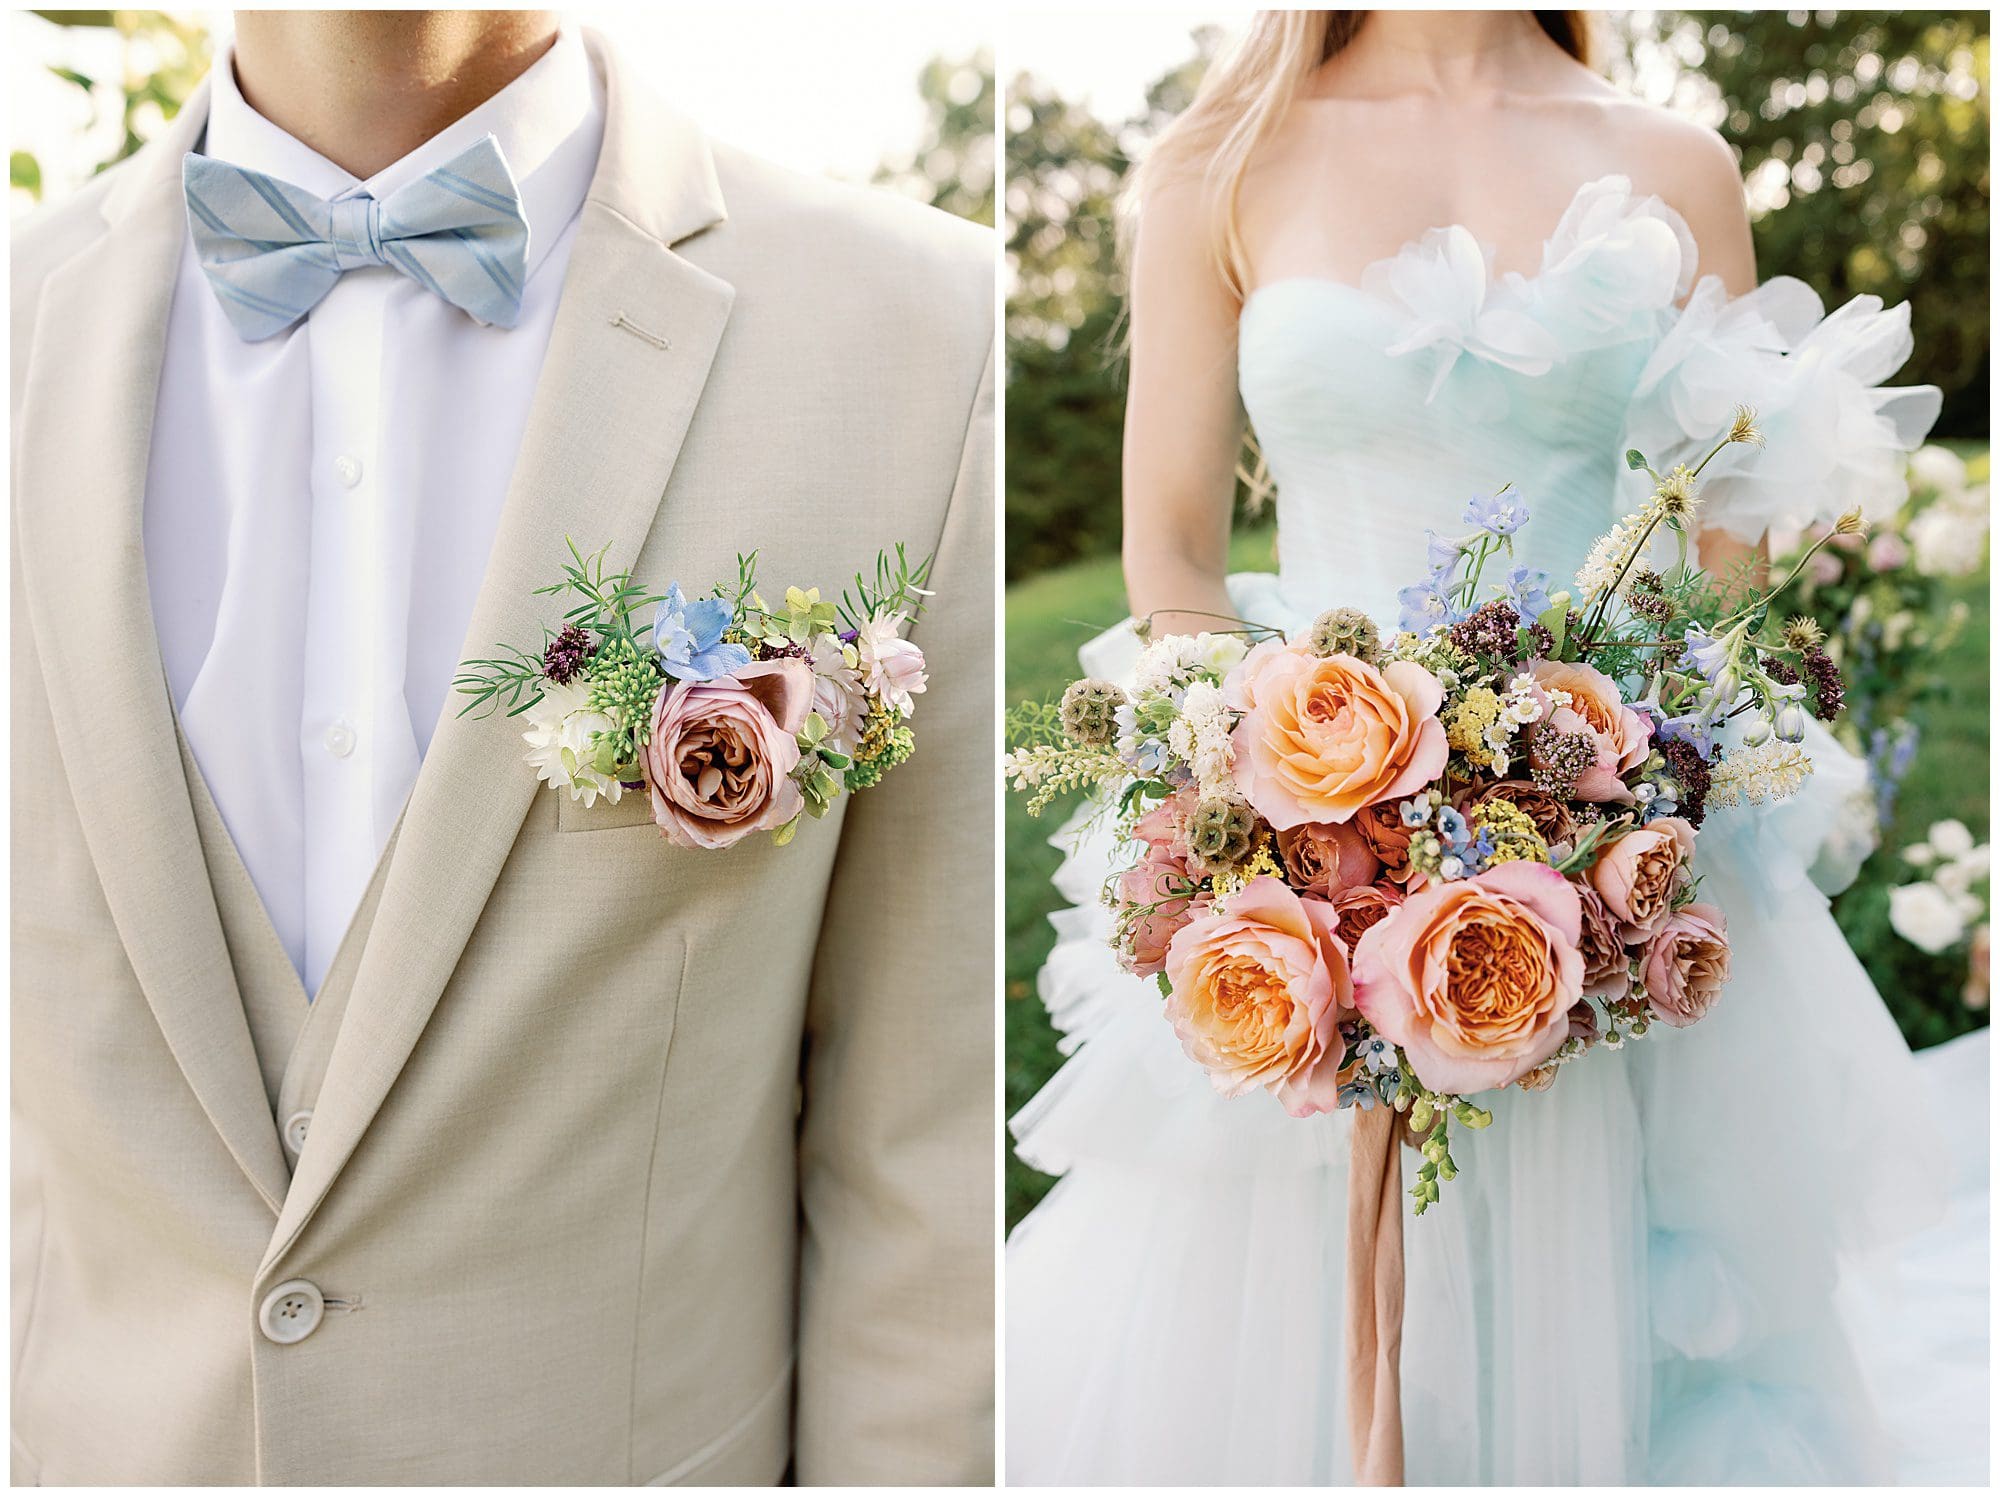 A Parisian-inspired summer wedding at The Ridge, featuring a bride in a blue tuxedo and a groom in a bow tie.